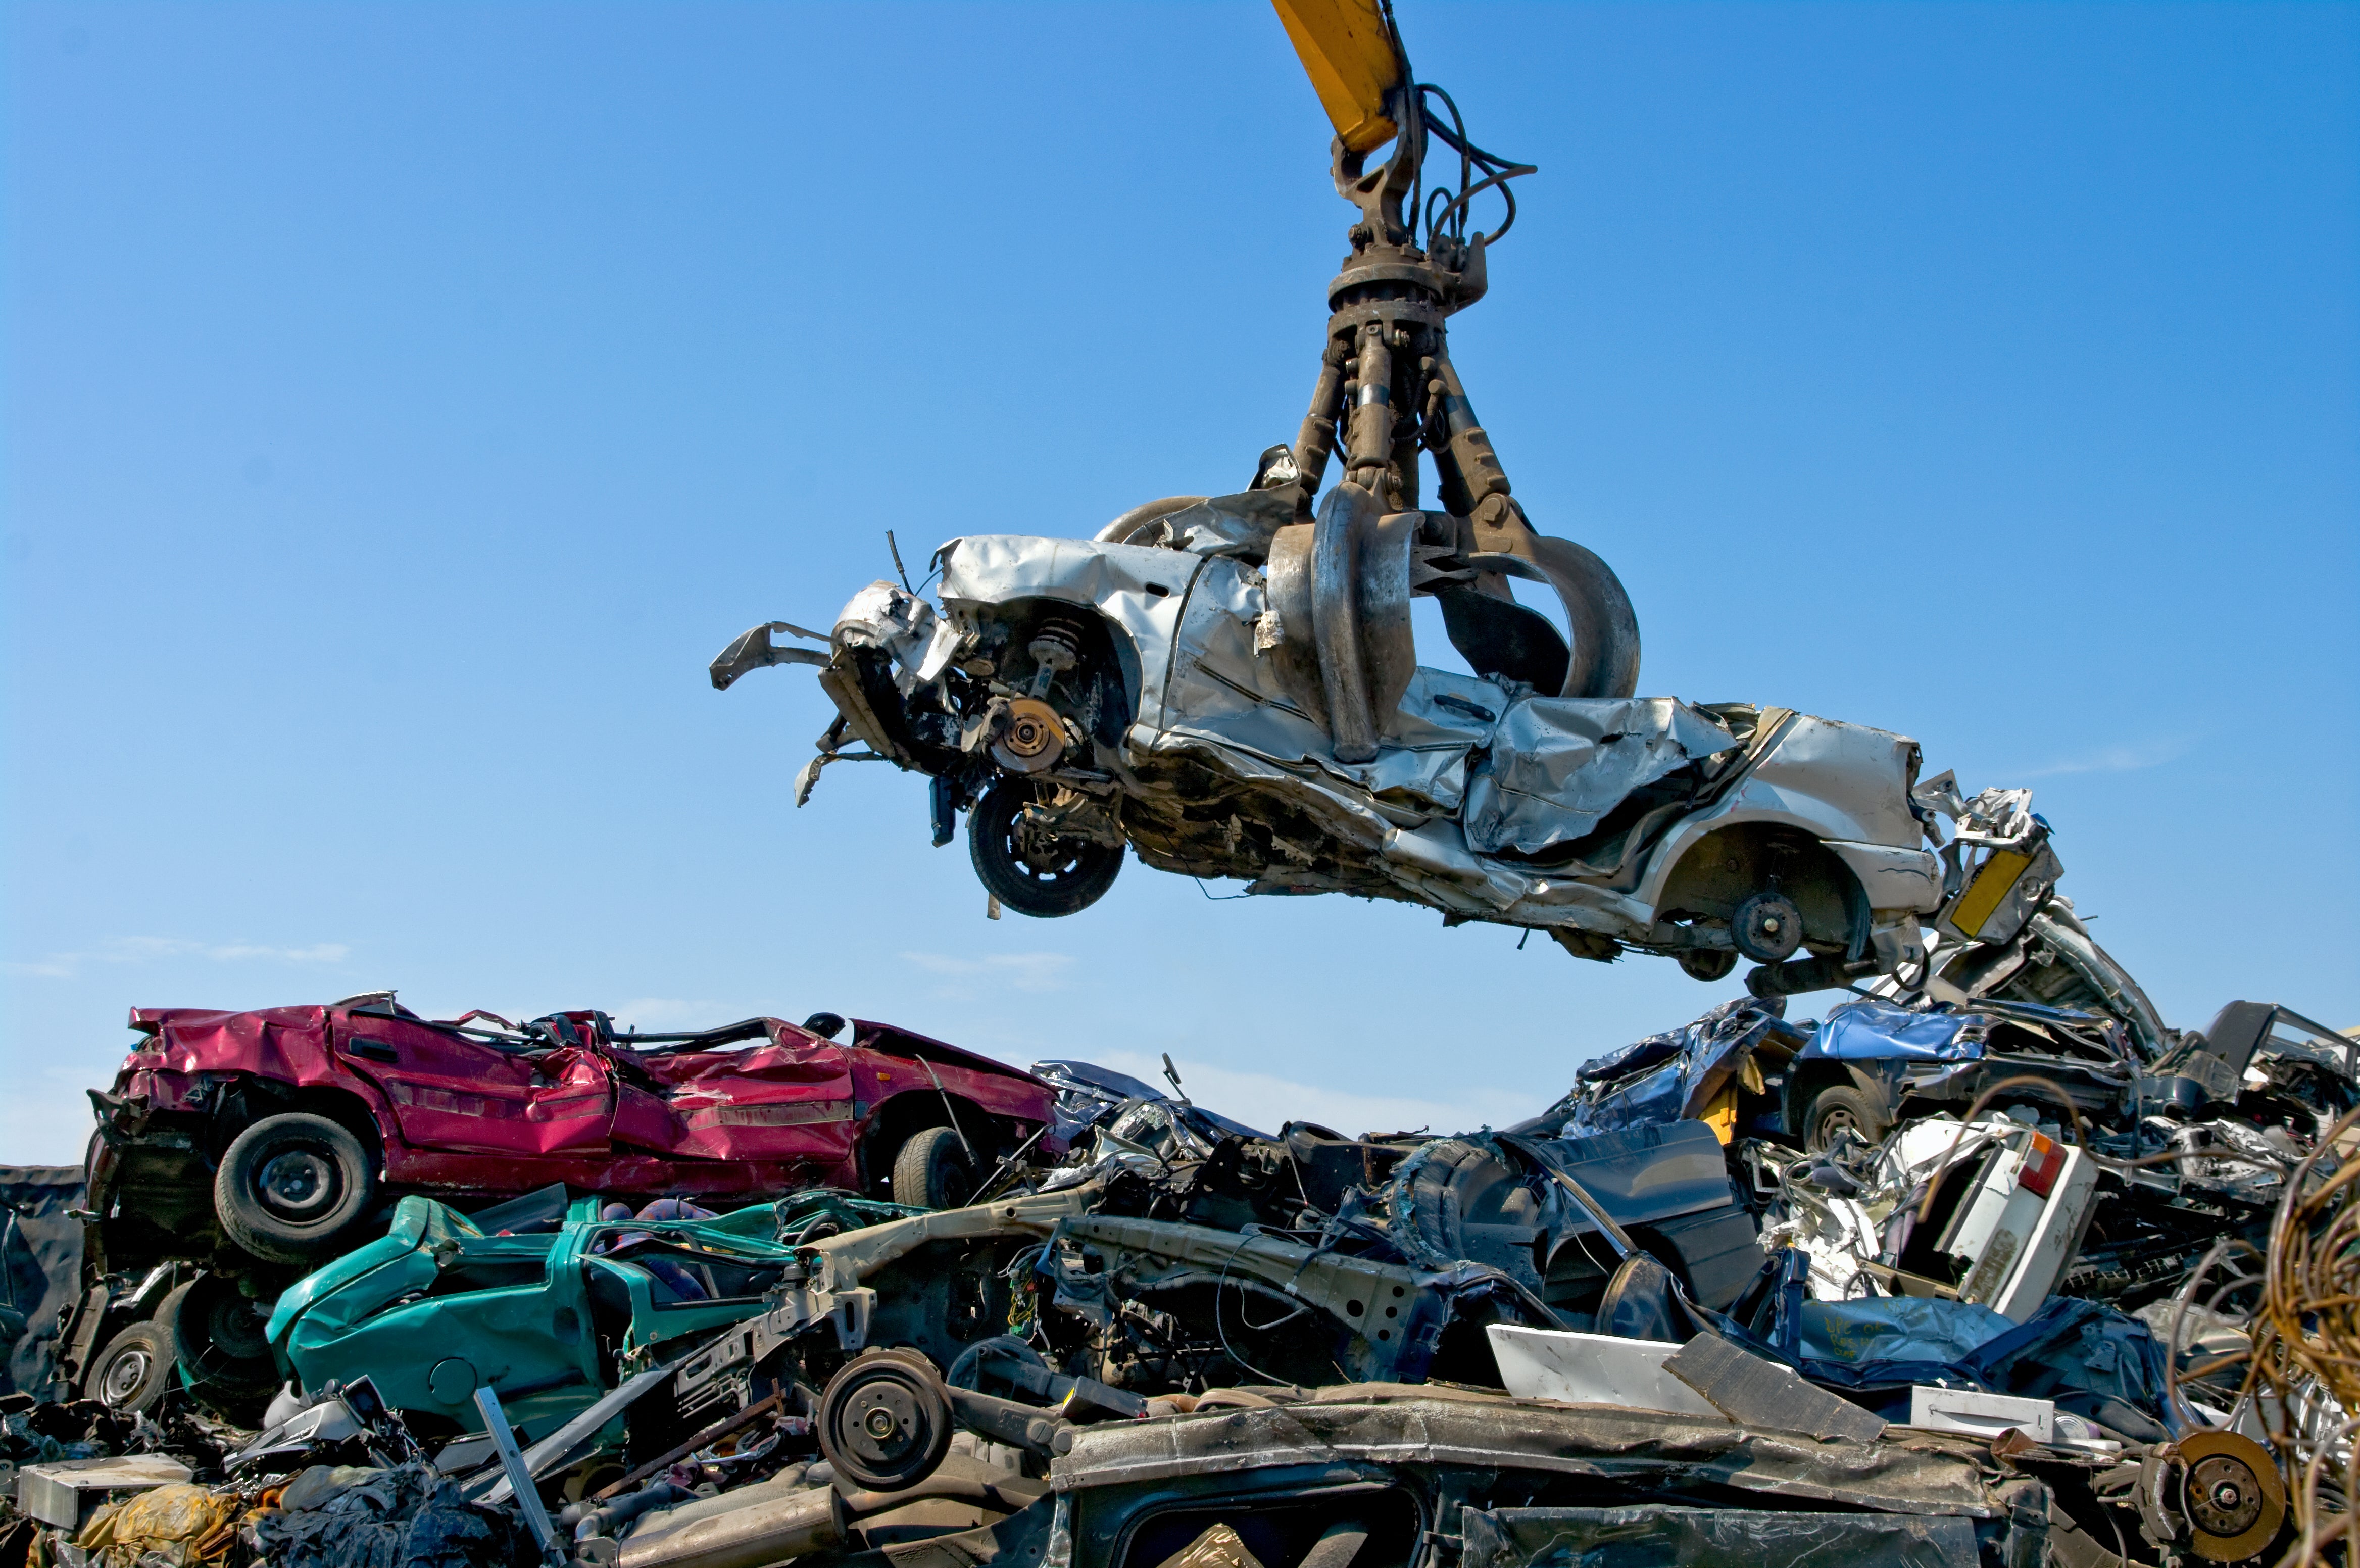 Scrap car parts used in sustainable clothing range